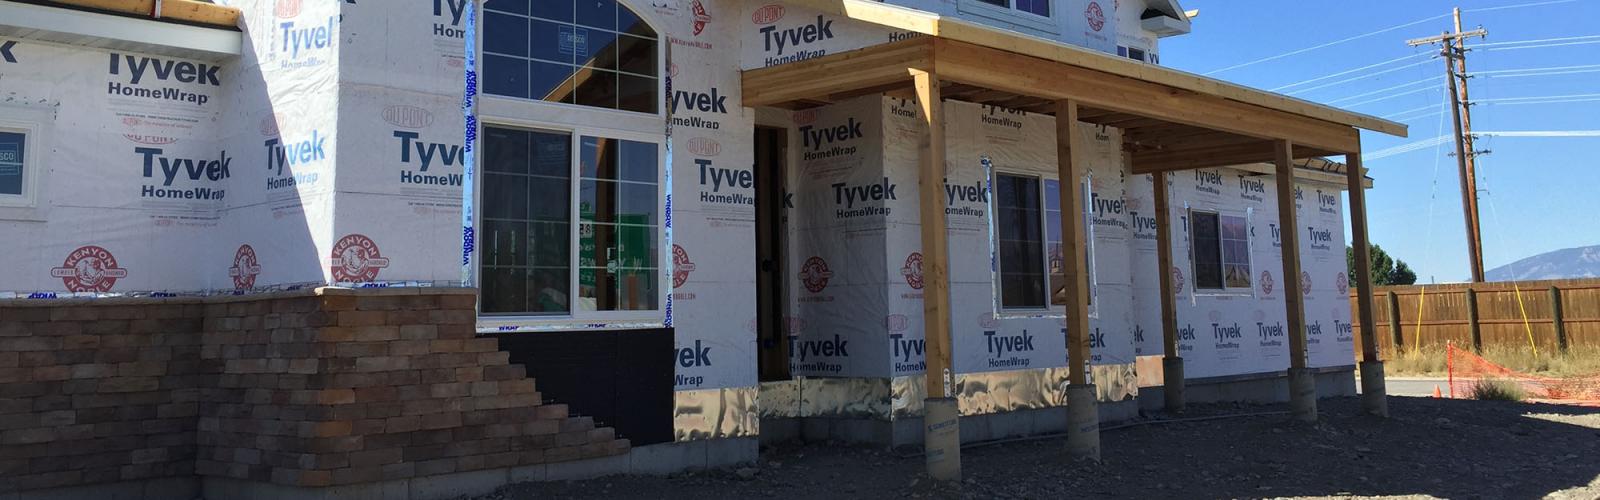 Wall and roof sheathing and tyvek